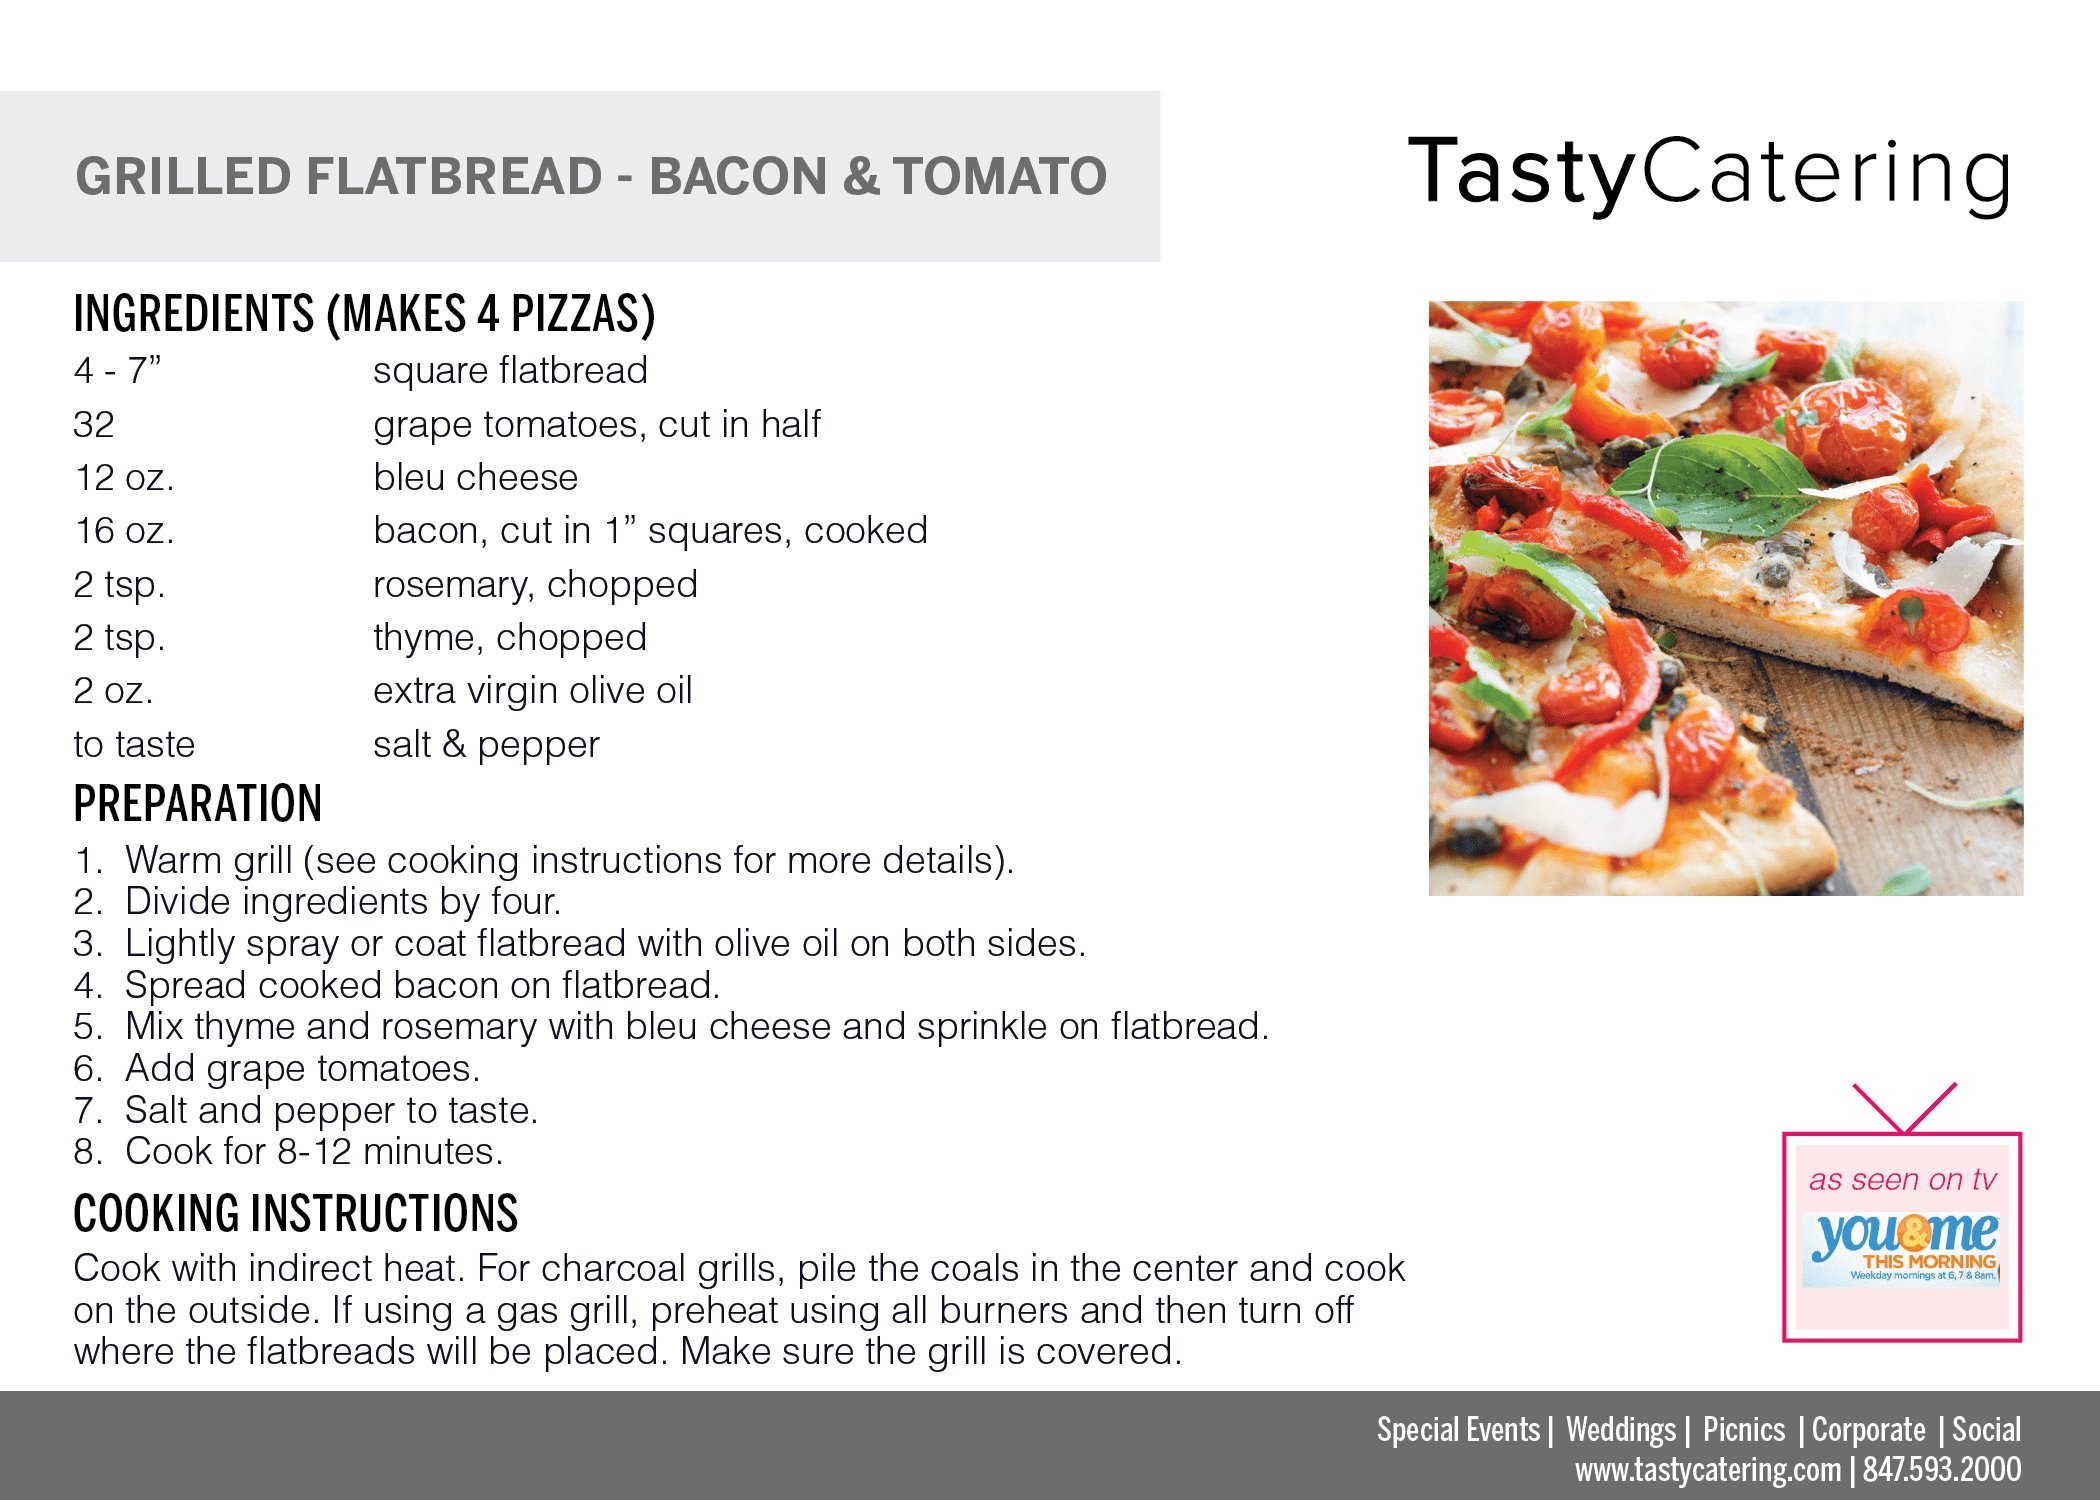 Flat Bread(tomato and bacon) Recipe Card - You & Me-01